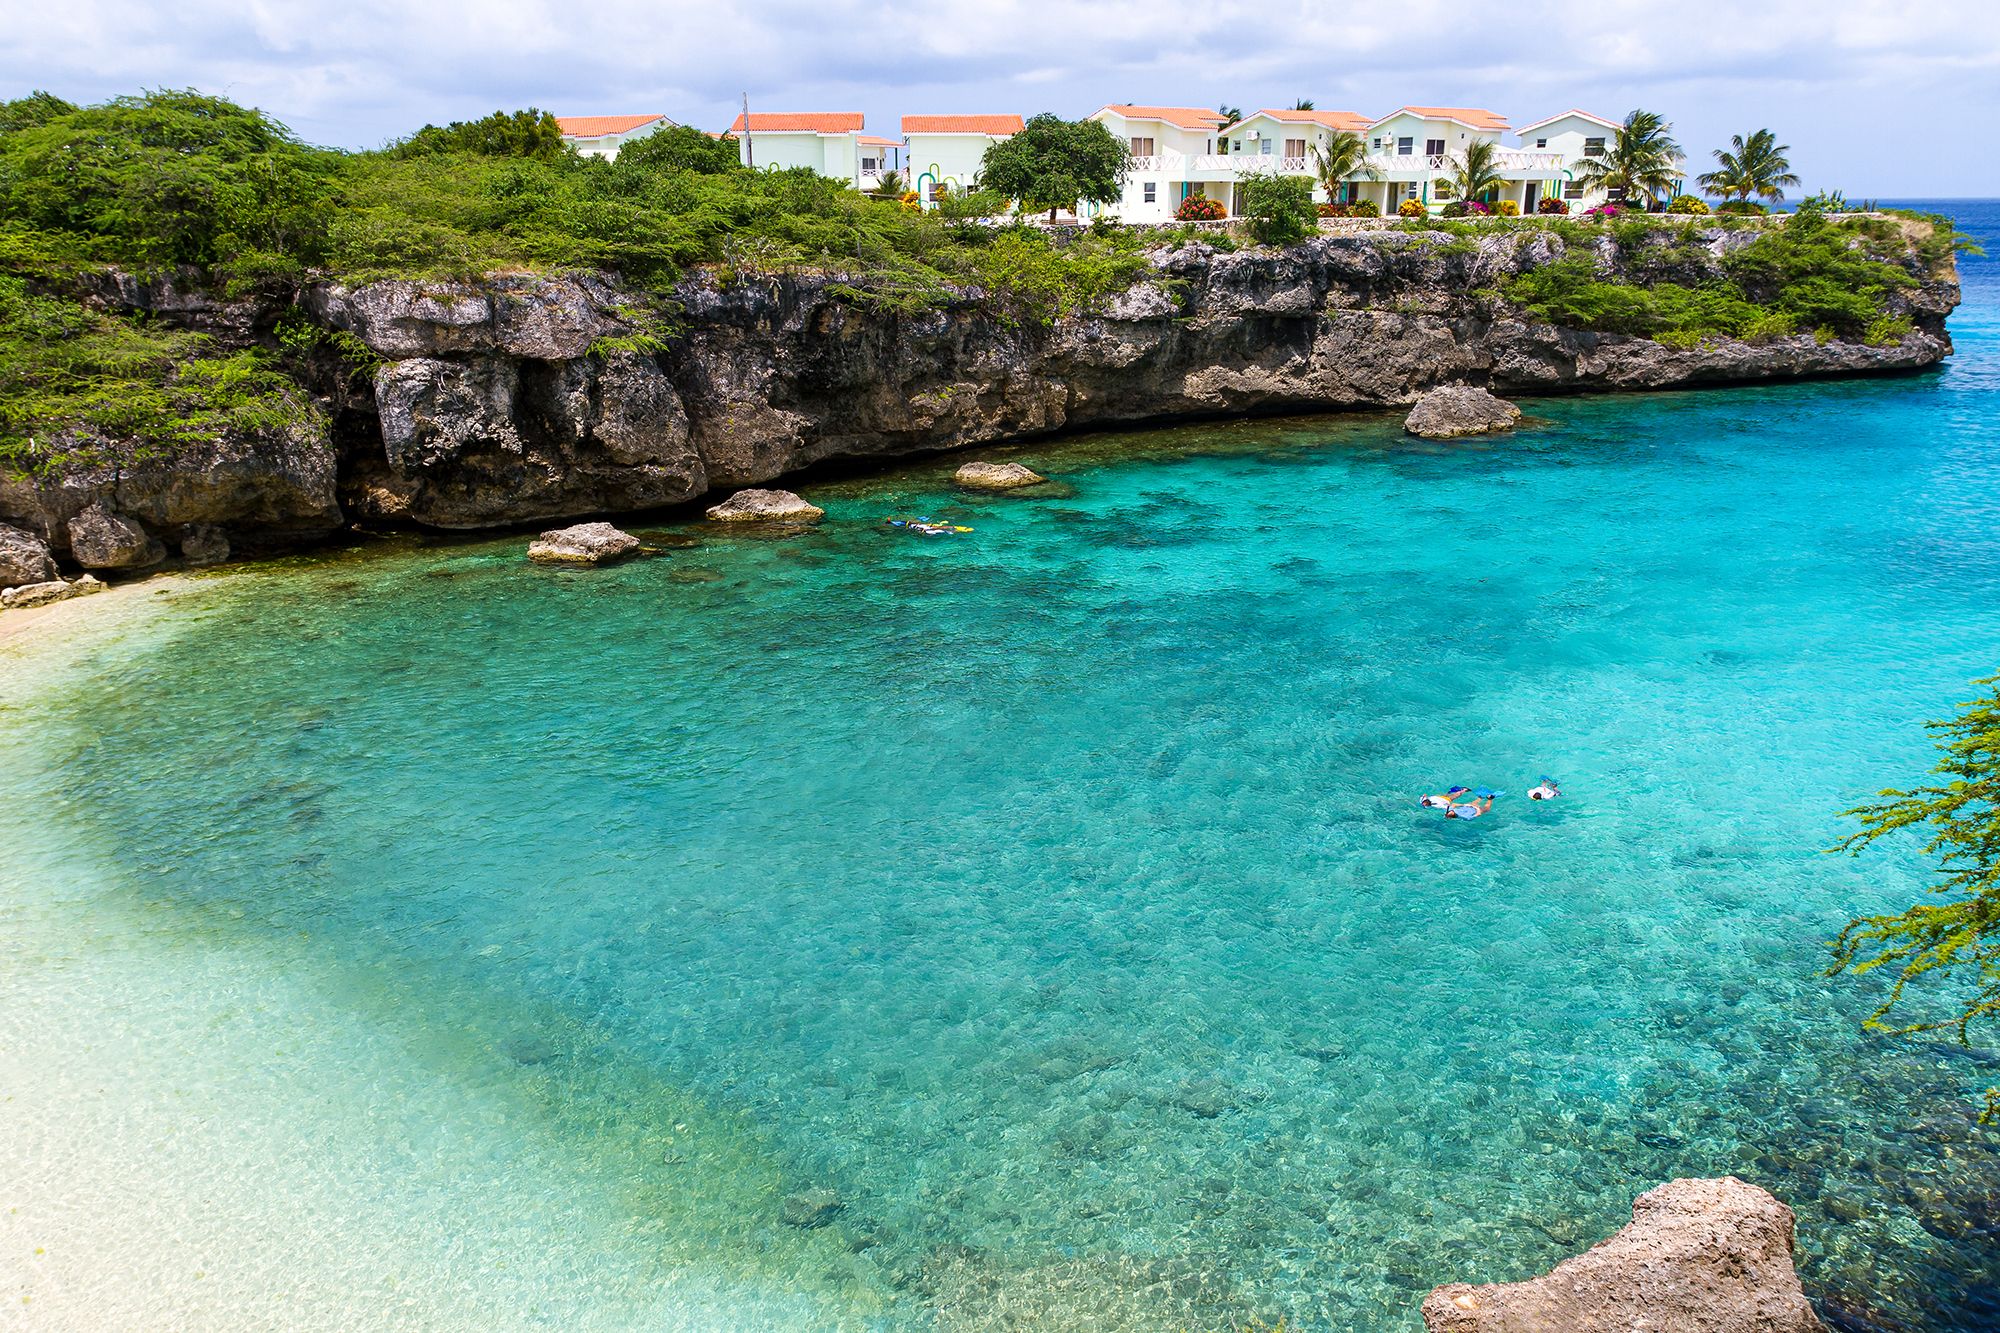 An Unforgettable Snorkeling Experience Awaits In Curaçao